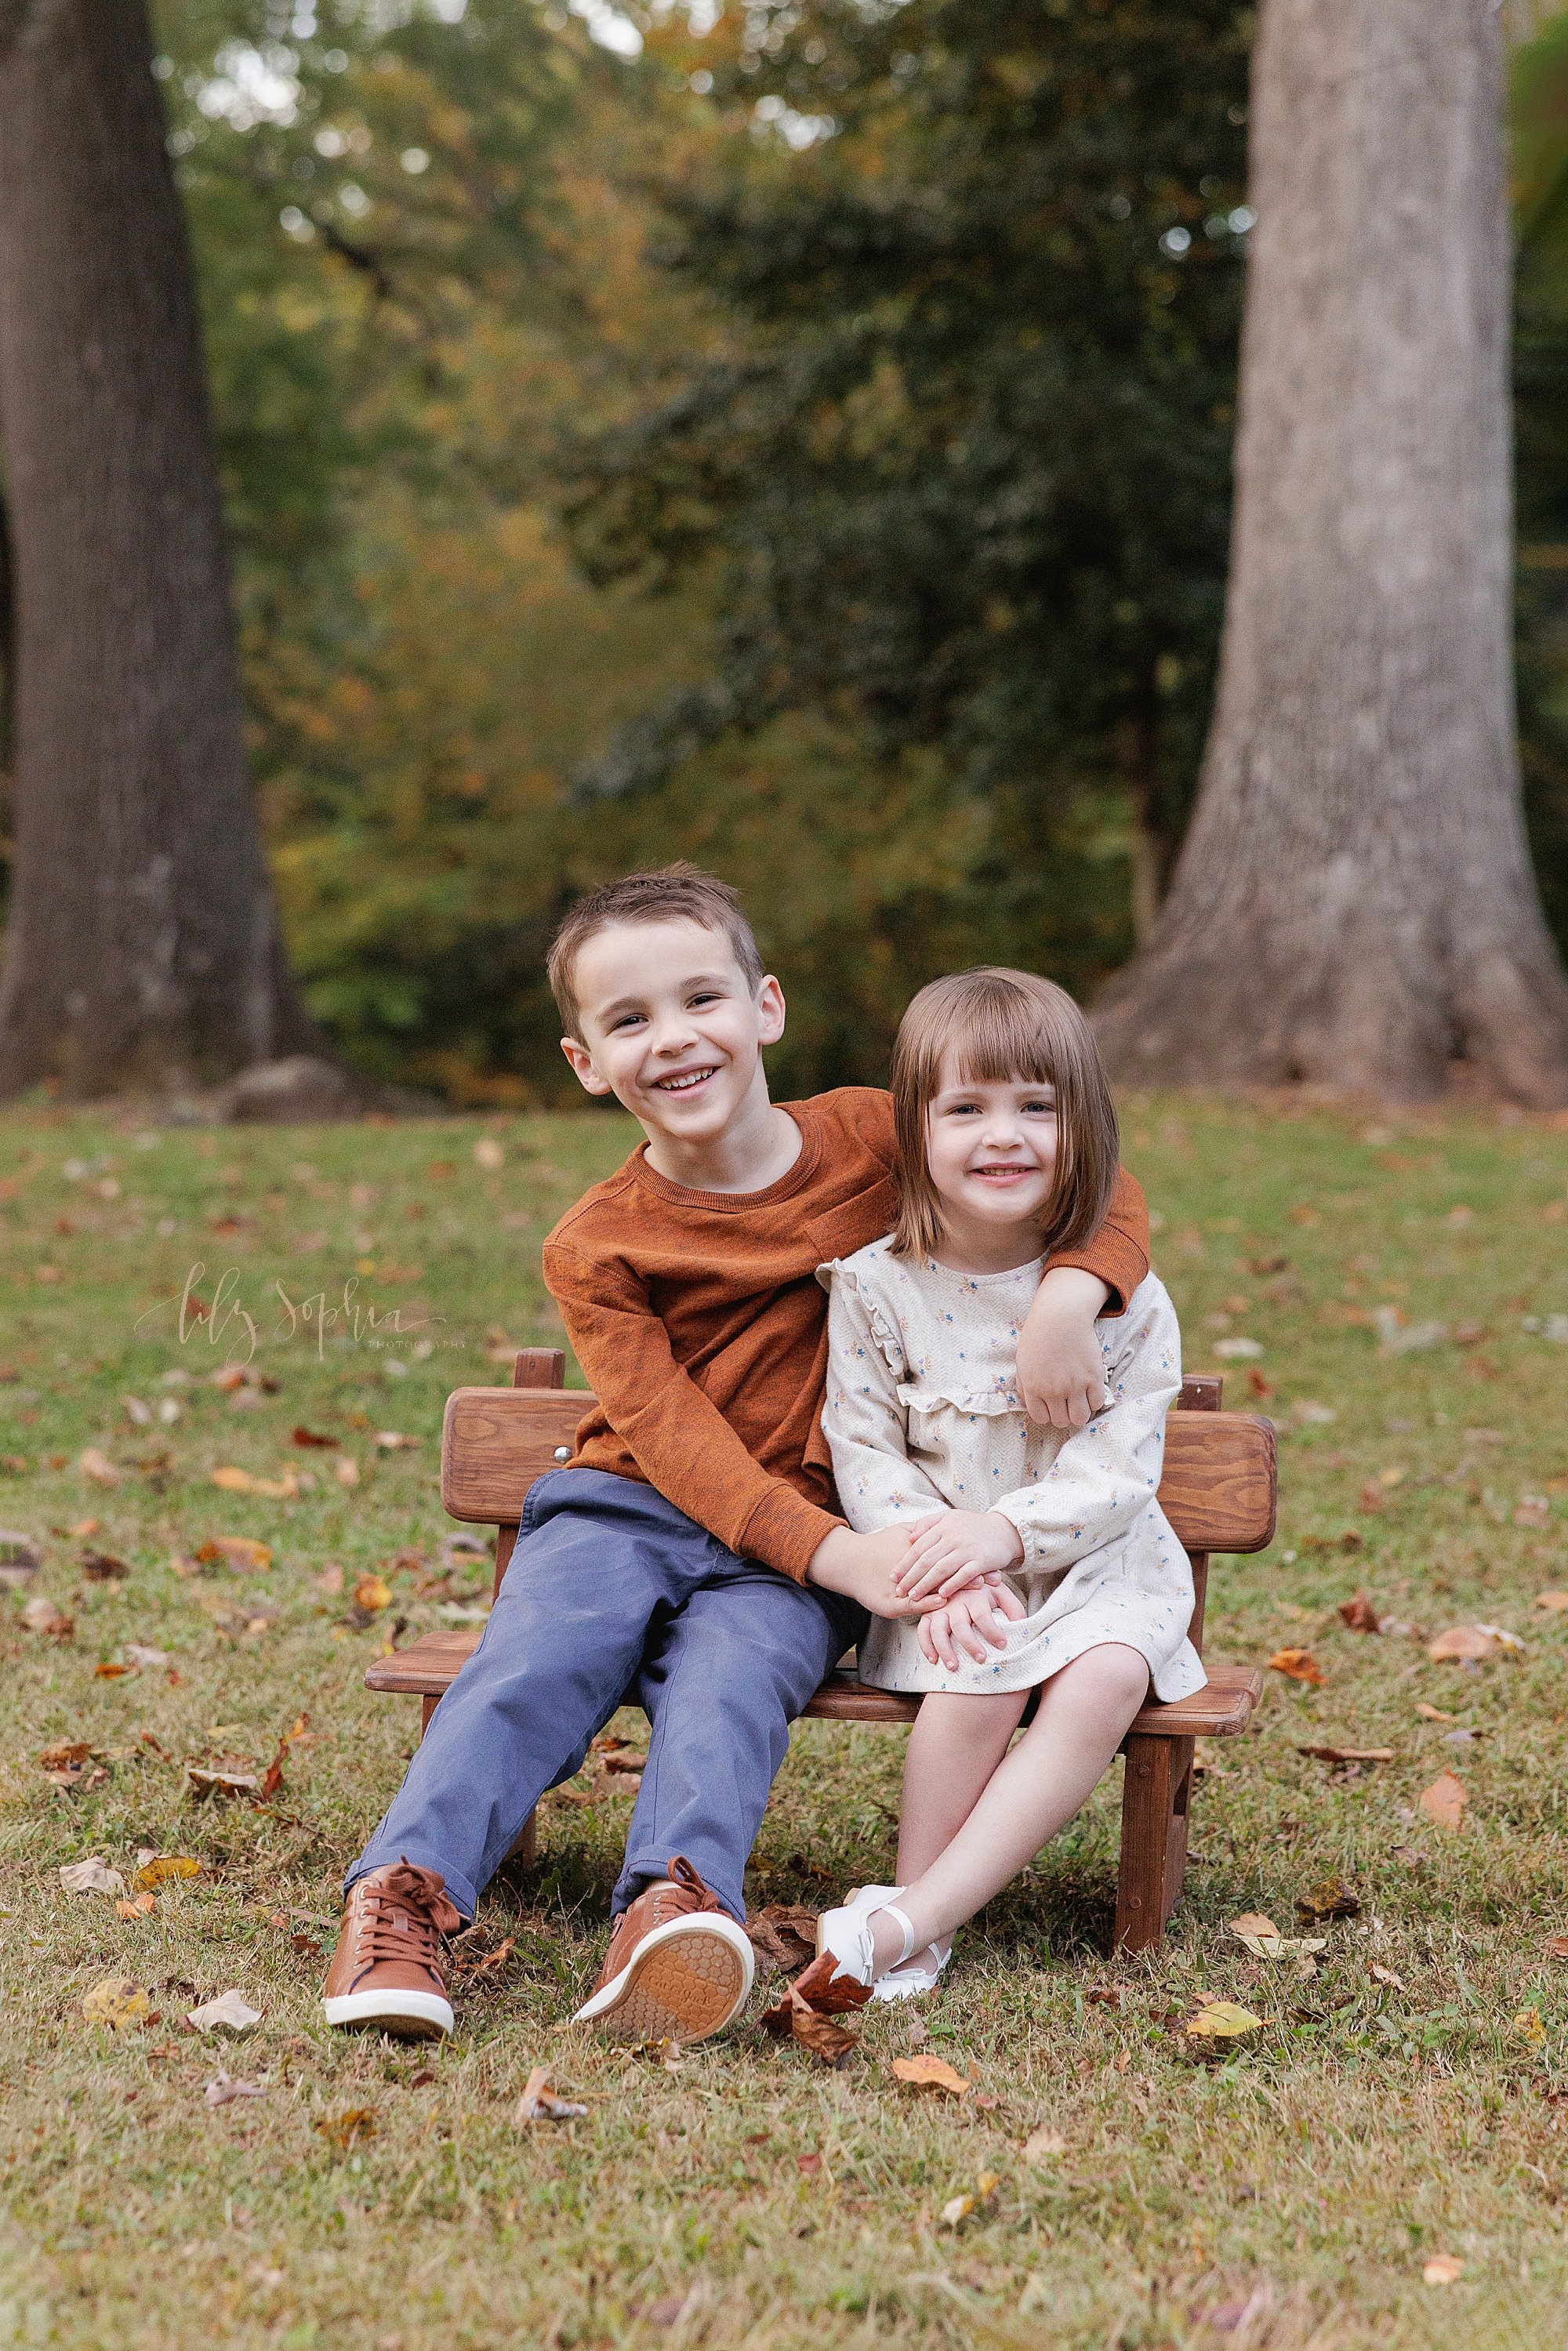 intown-atlanta-decatur-brookhaven-buckhead-outdoor-fall-pictures-family-photoshoot_5554.jpg